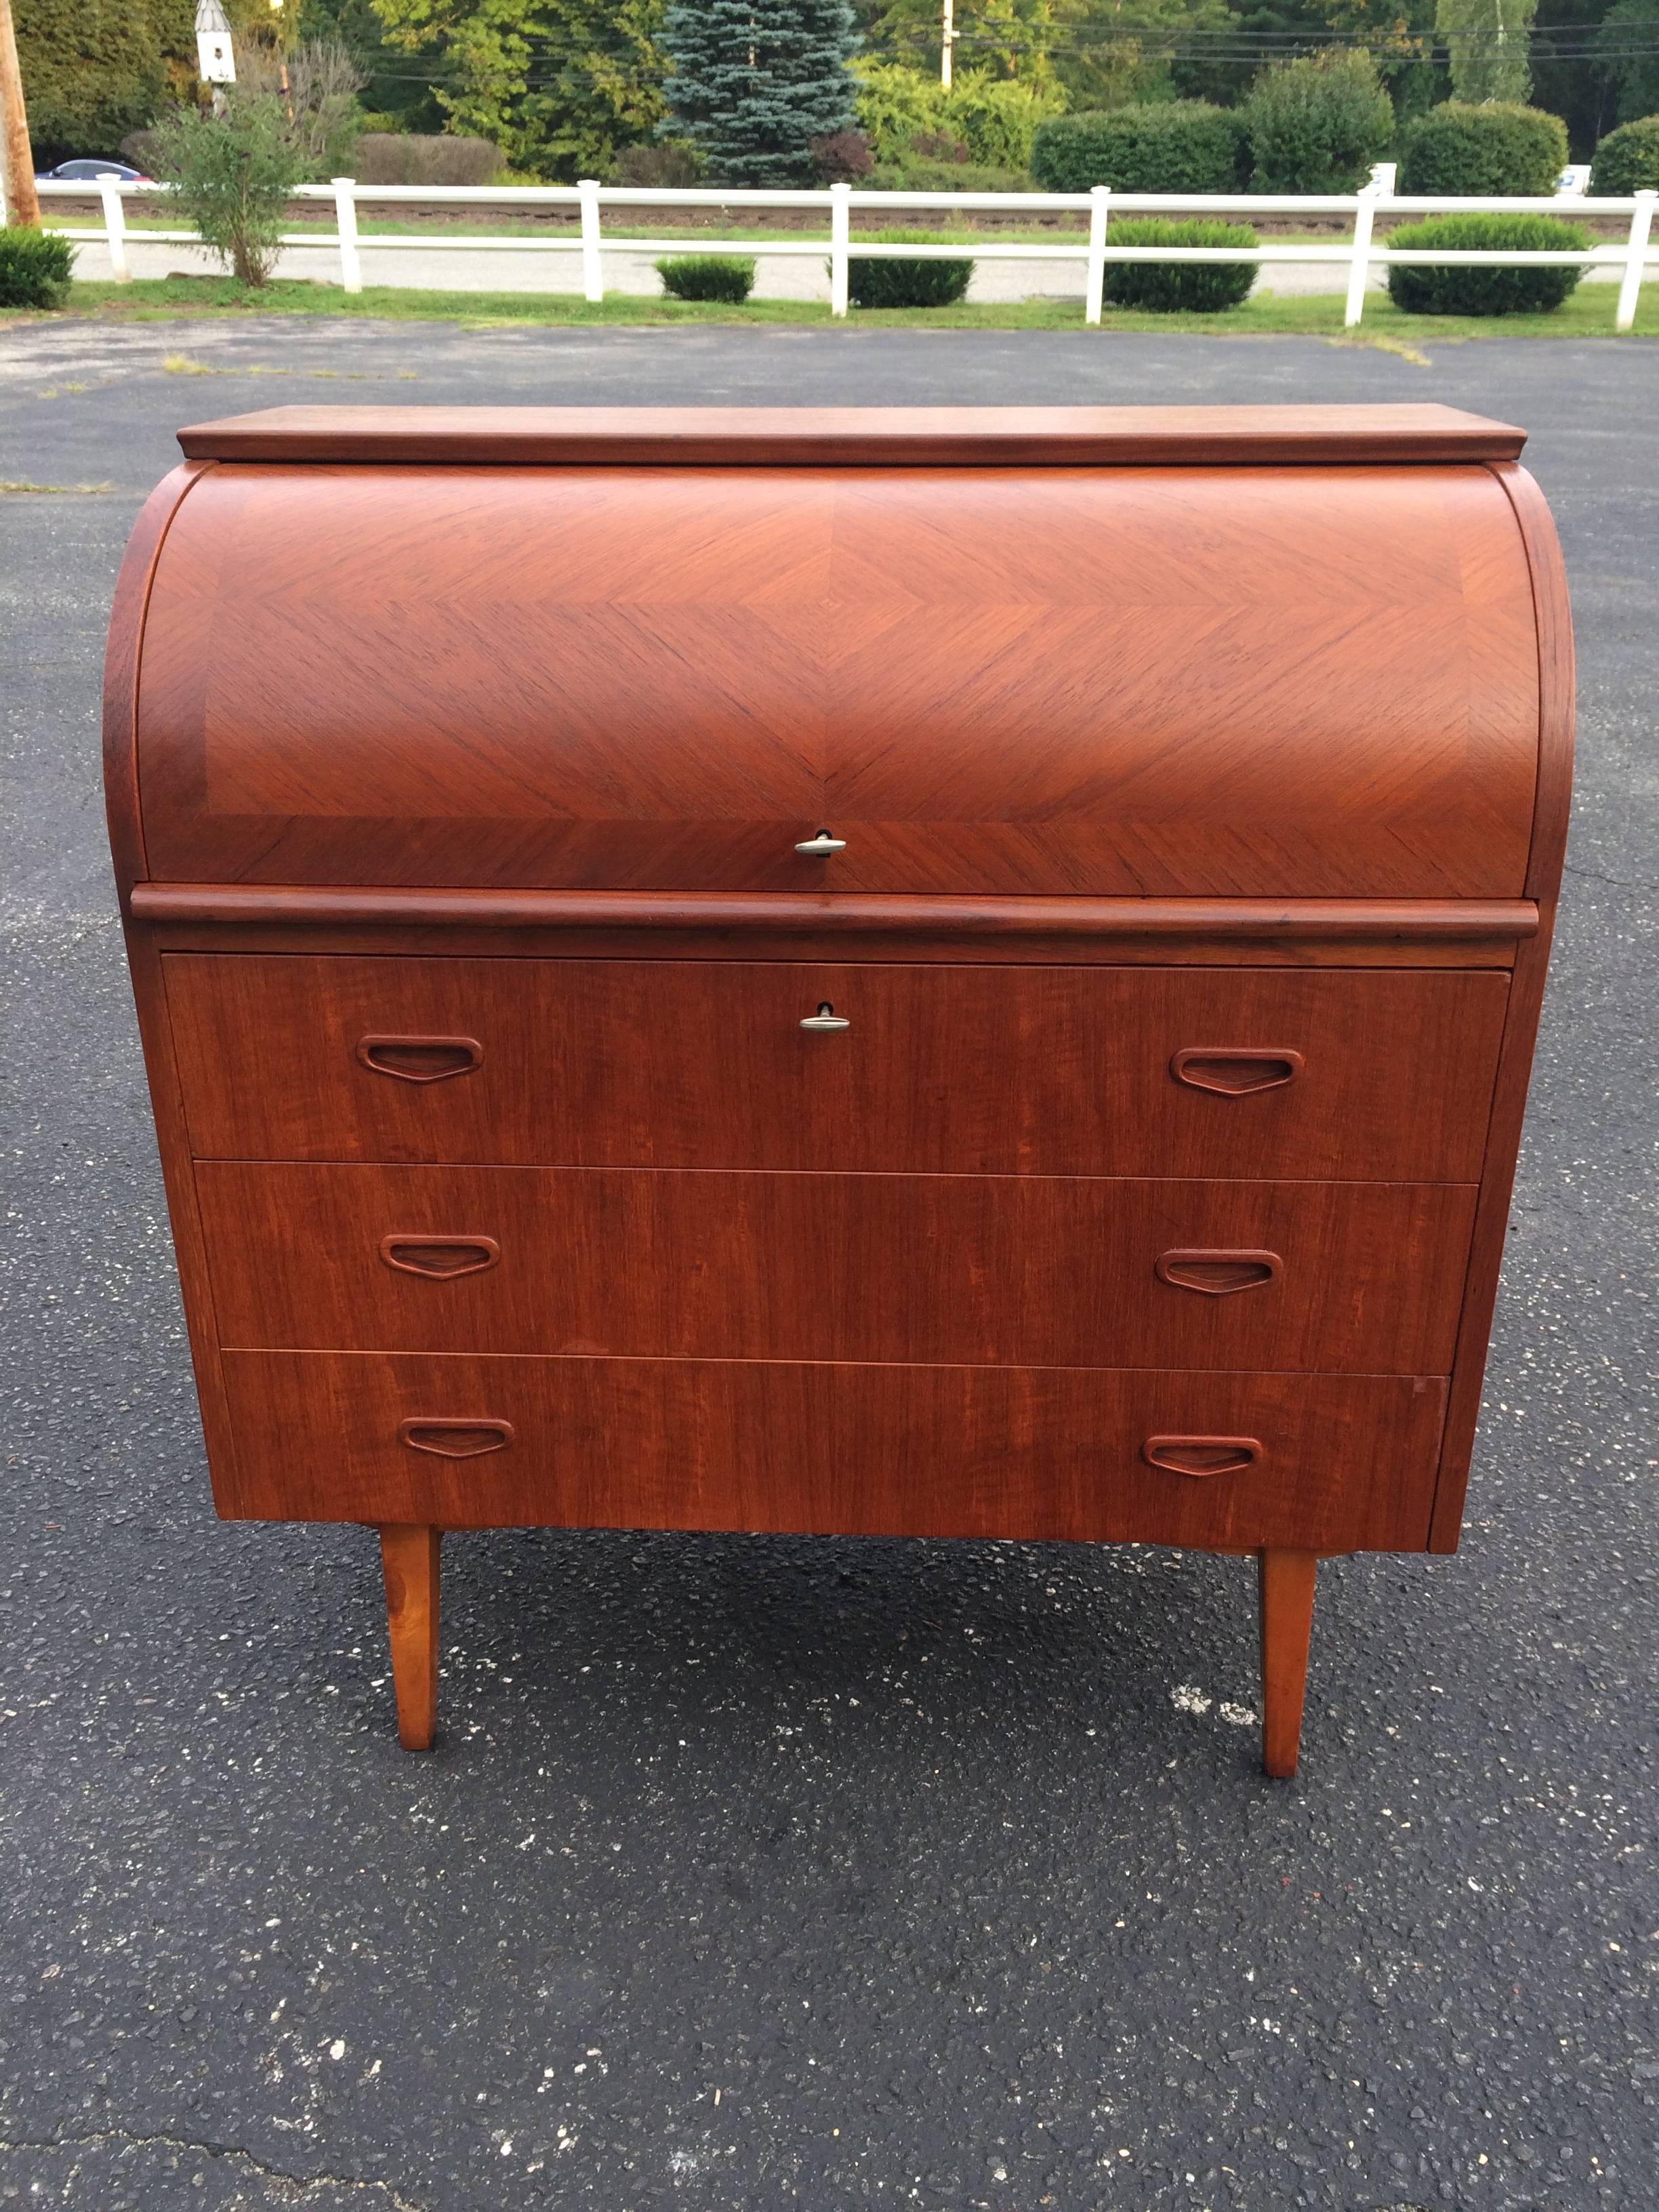 This desk is very practical desk with it's smart design and ample storage. Comes with two original keys to lock both the top compartment as well as the top drawer. Has a retractable writing base that pulls out from the interior once the cylindrical